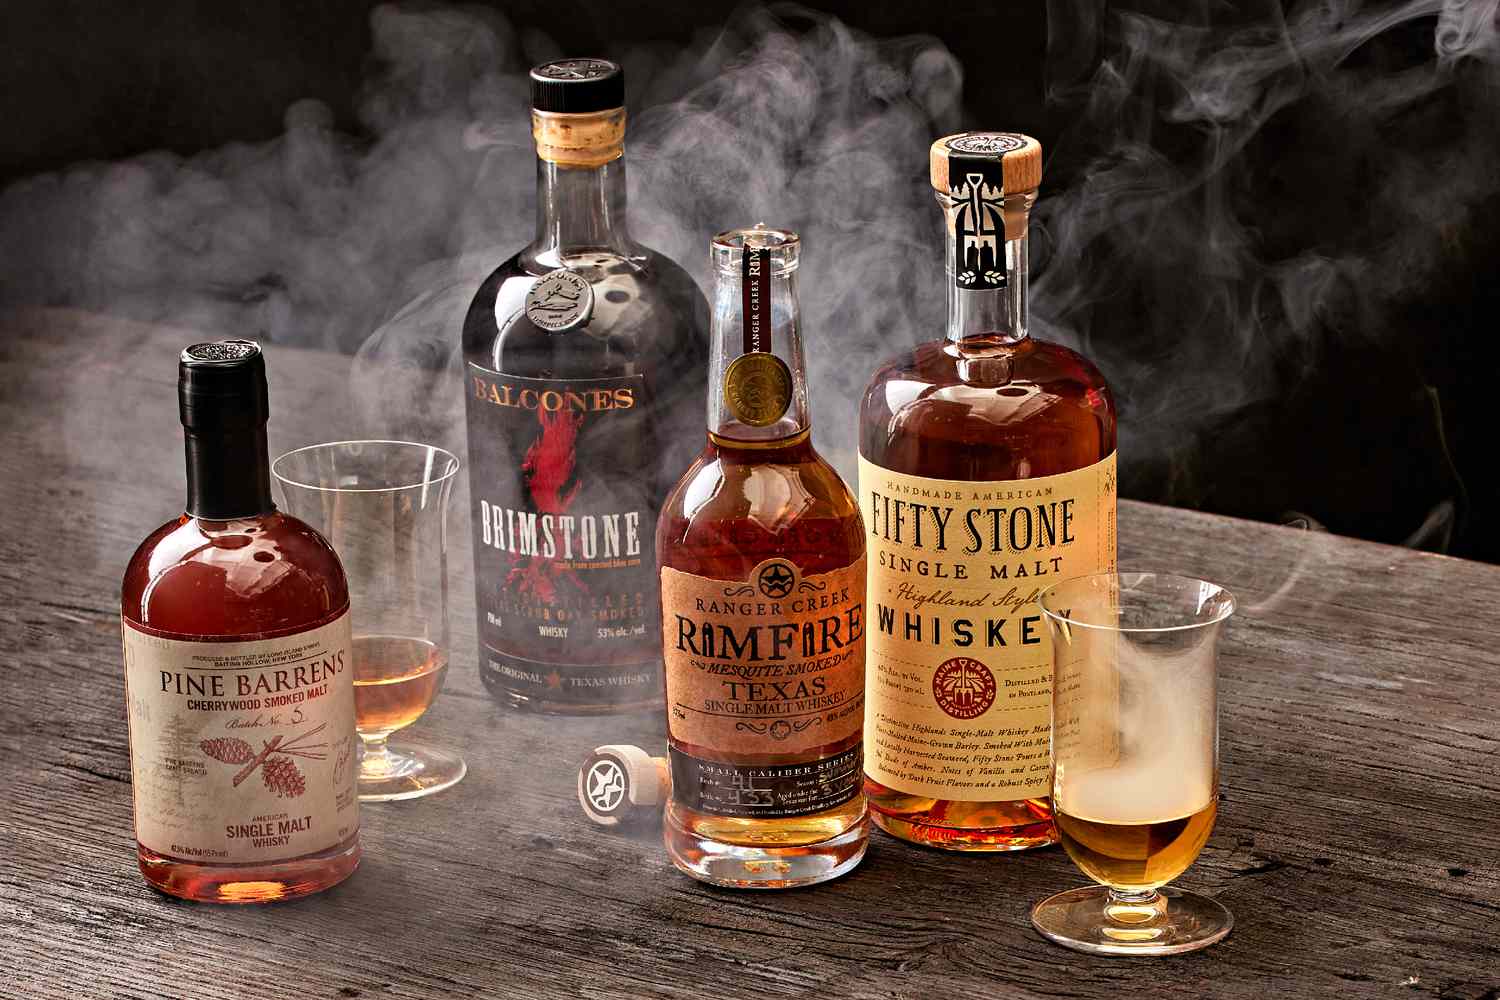 Follow-the-Smoke-Whiskeys-FT-MAG0323-c112af557d1a4256993b86d7ad58b723